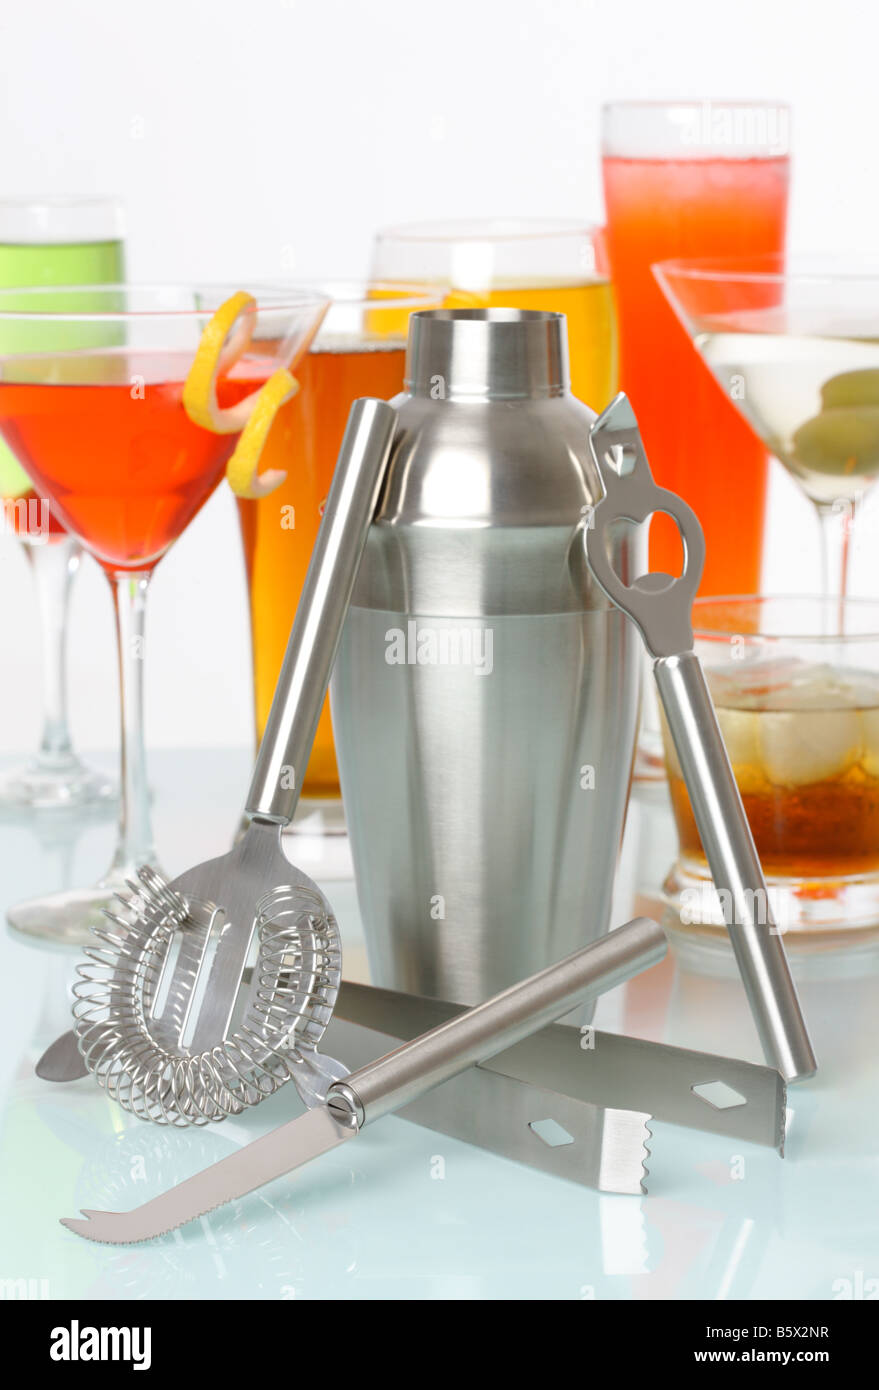 Bartending tools with a variety of drinks and cocktails in background Stock Photo